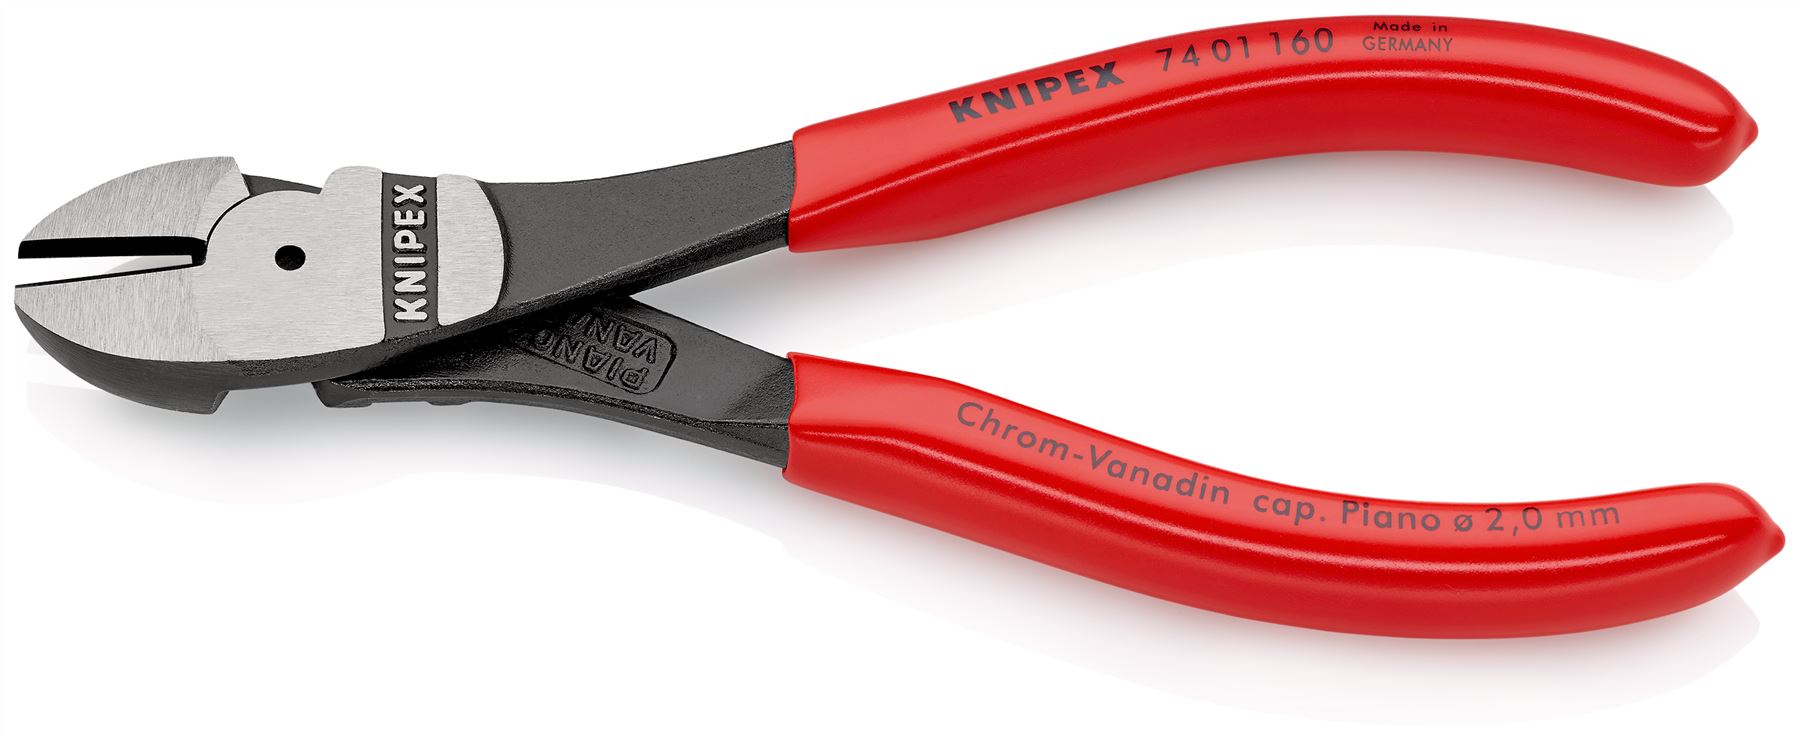 Knipex High Leverage Diagonal Side Cutting Pliers 160mm 74 01 160